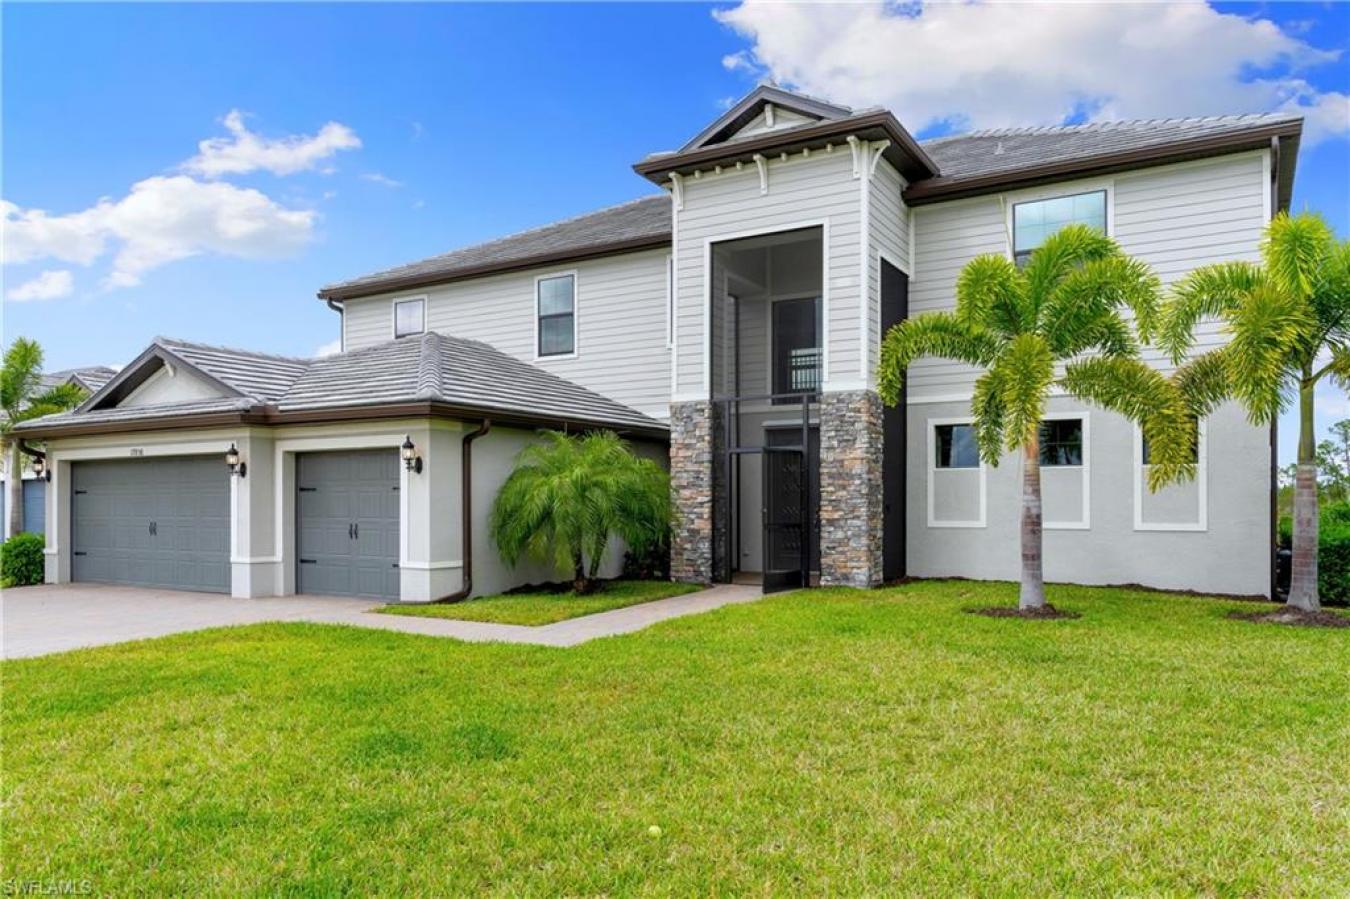 17858 Rosehill Court, ESTERO, Florida, 33928, United States, 5 Bedrooms Bedrooms, ,4 BathroomsBathrooms,Residential,For Sale,17858 Rosehill Court,1501867